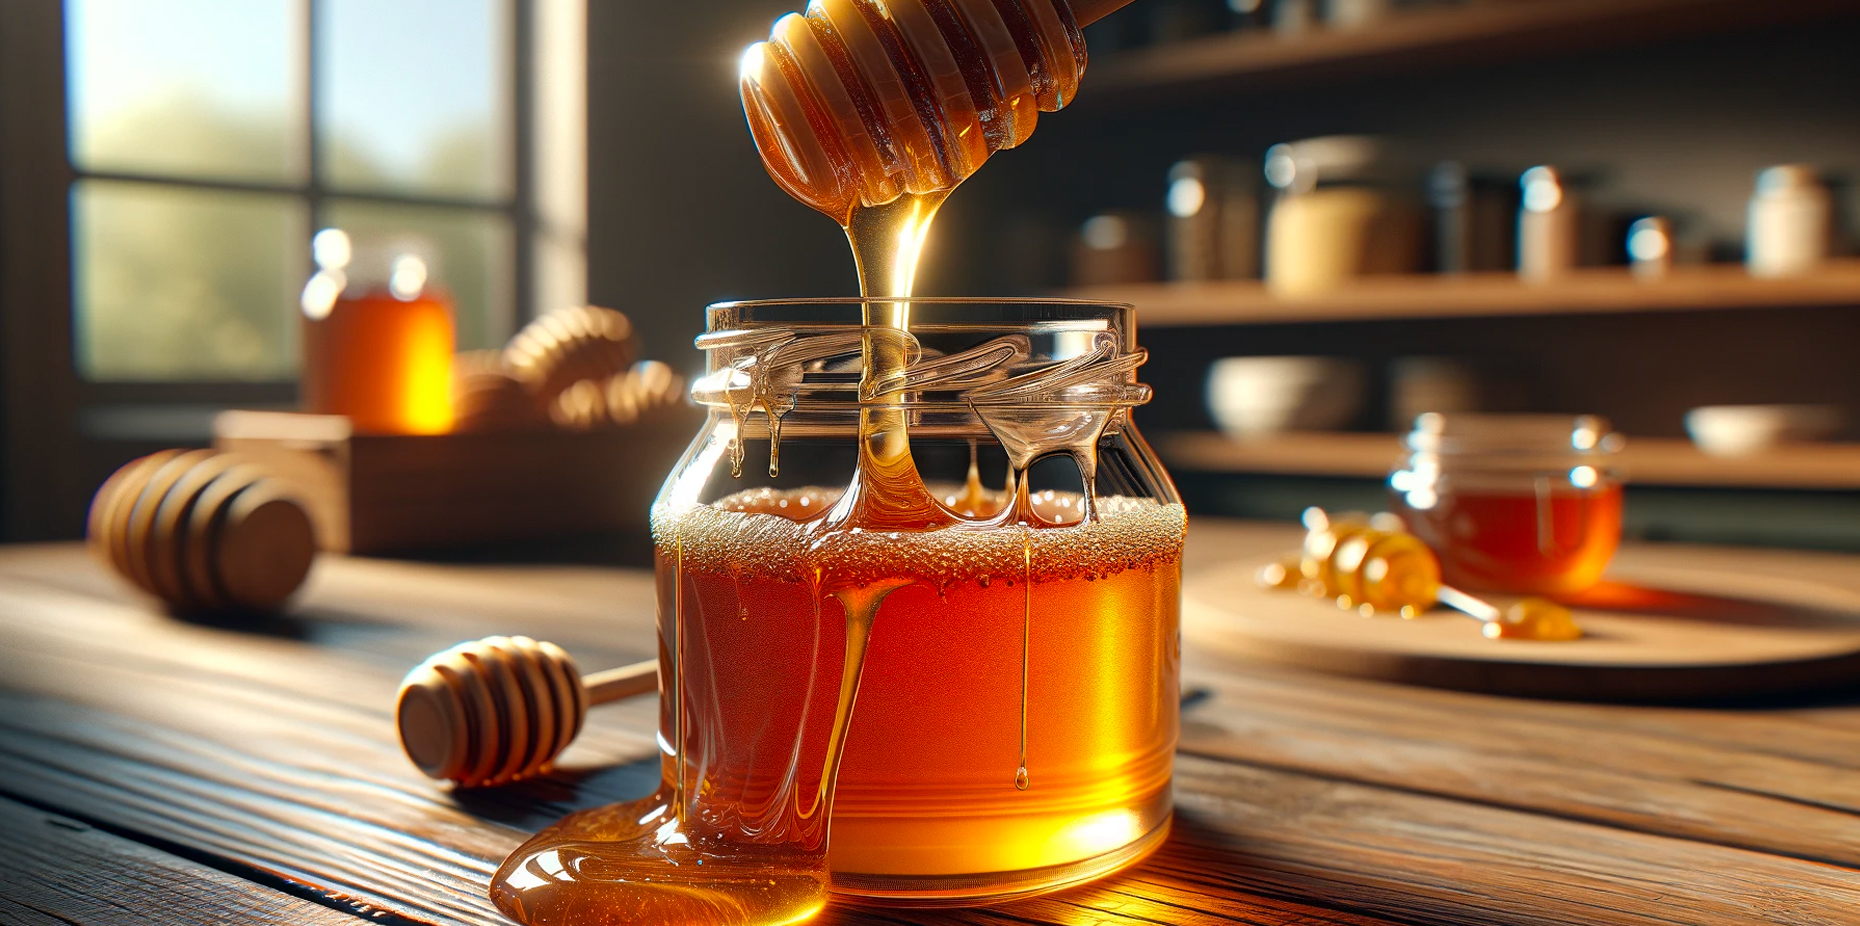 Honey: Facts, Nutrition, Benefits, & More